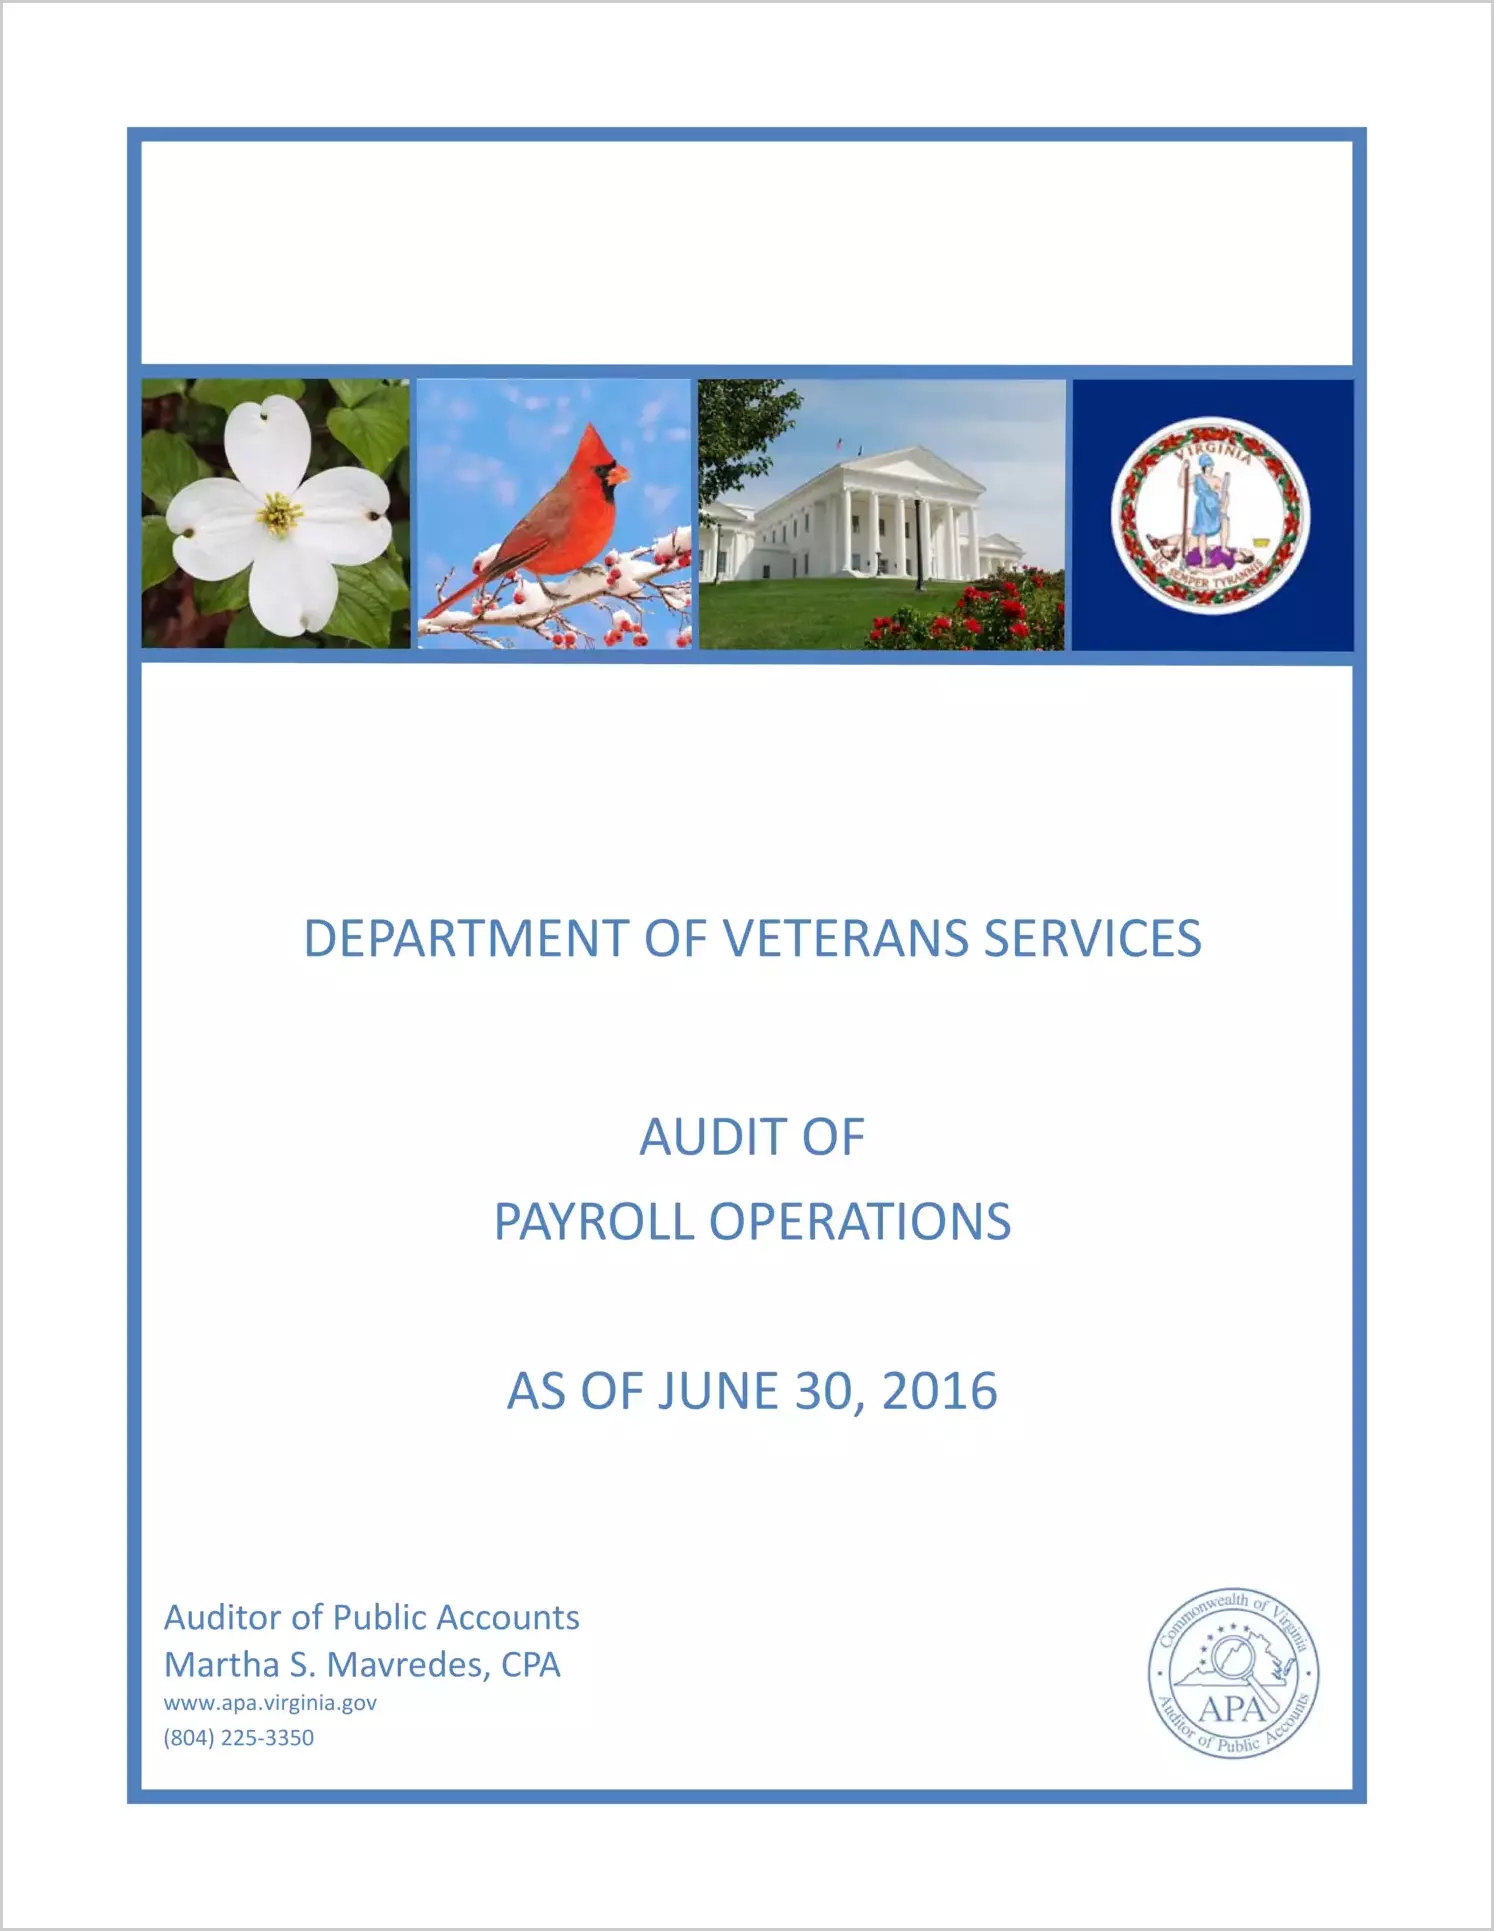 Department of Veterans Services Audit of Payroll Operations as of June 30, 2016